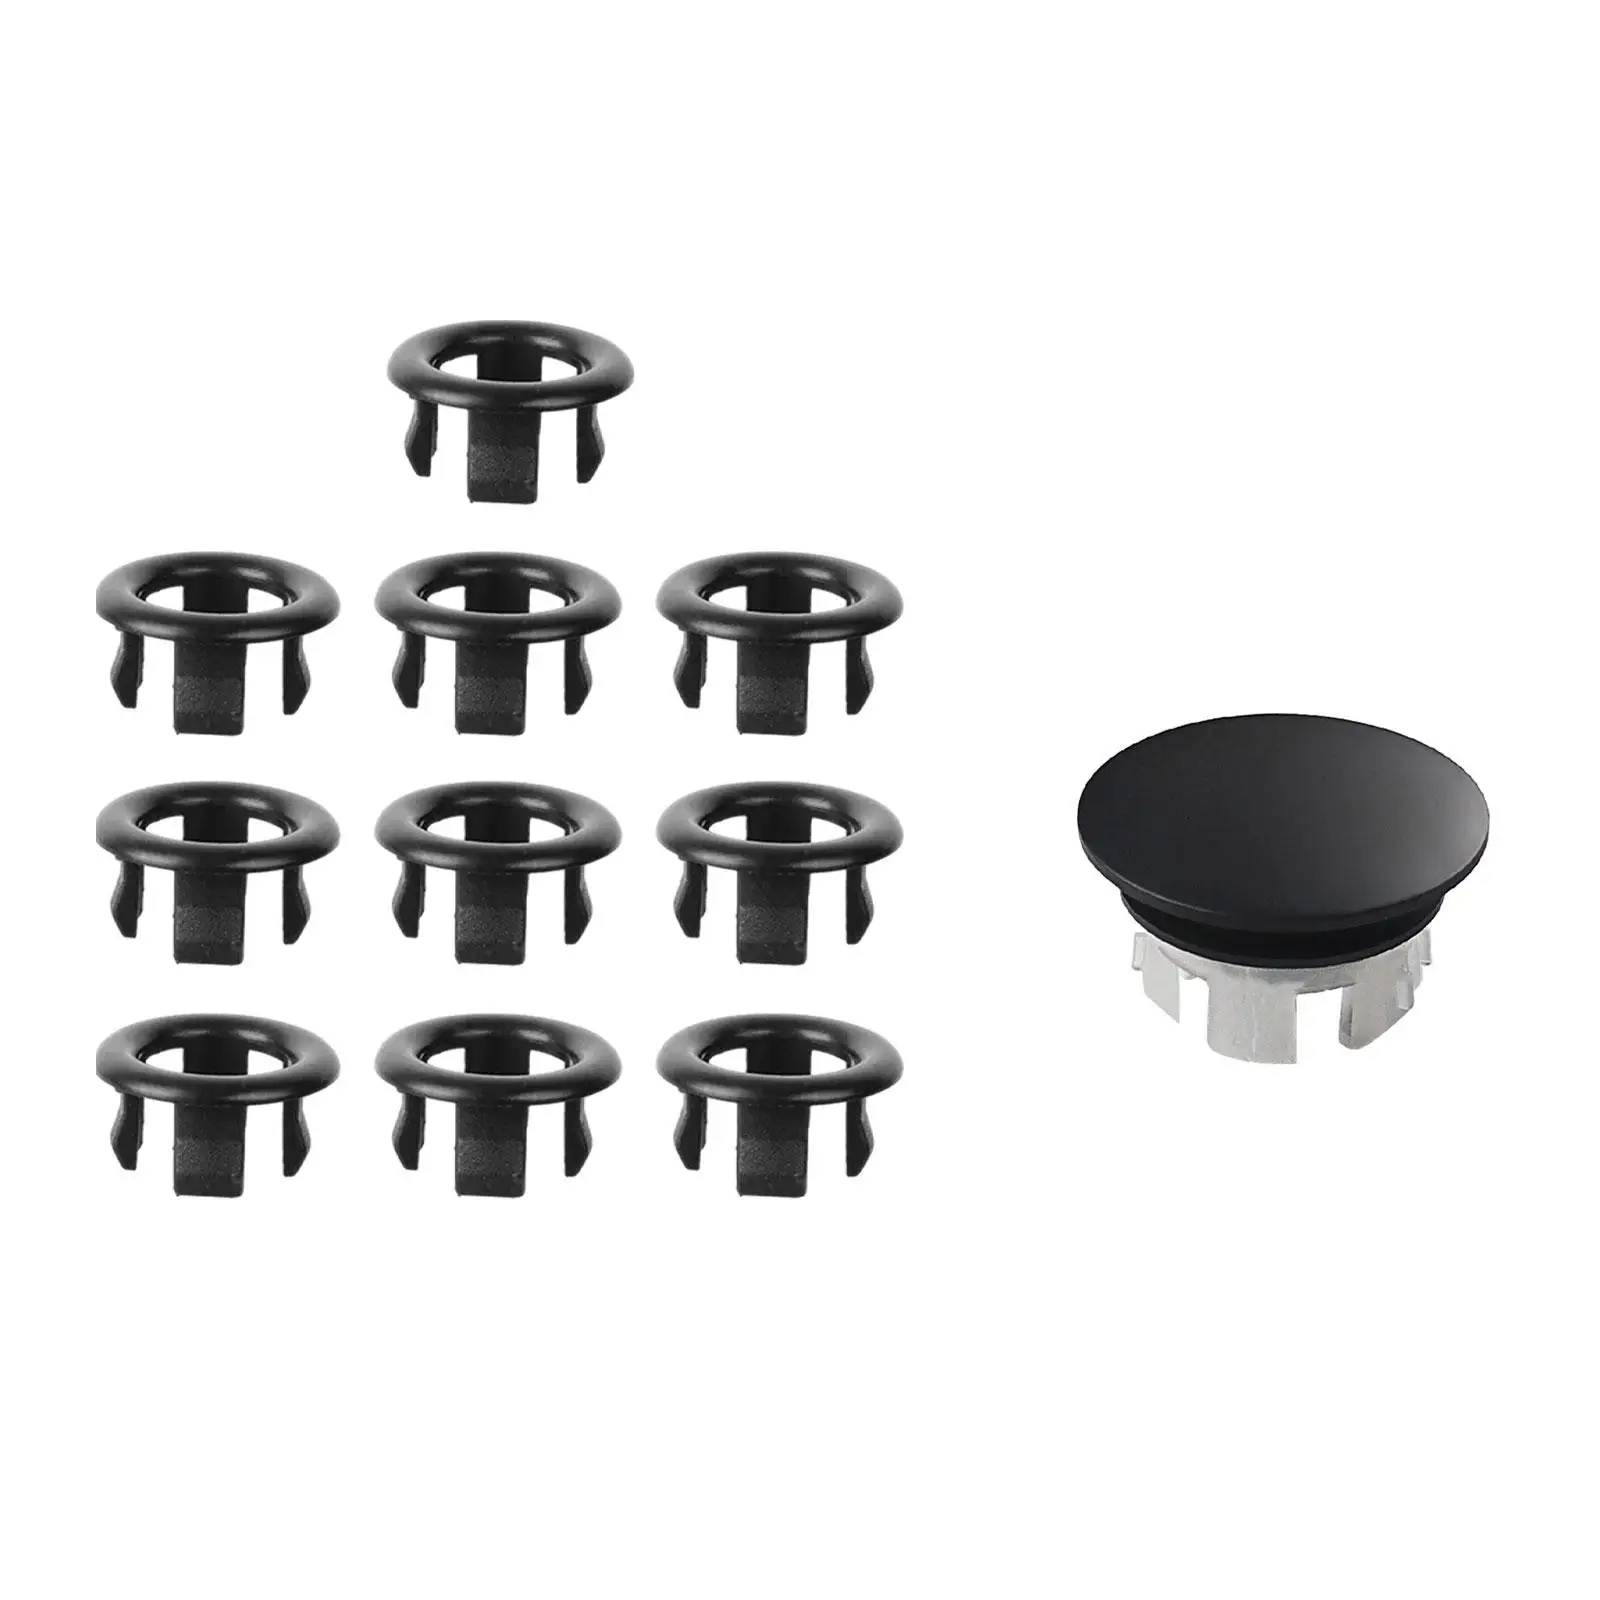 

10 Pieces Hole Insert Cap Drain Overflow Cover Basin Cover Sink Overflow Ring for Bathroom Kitchen Hotel Restroom Lavatory